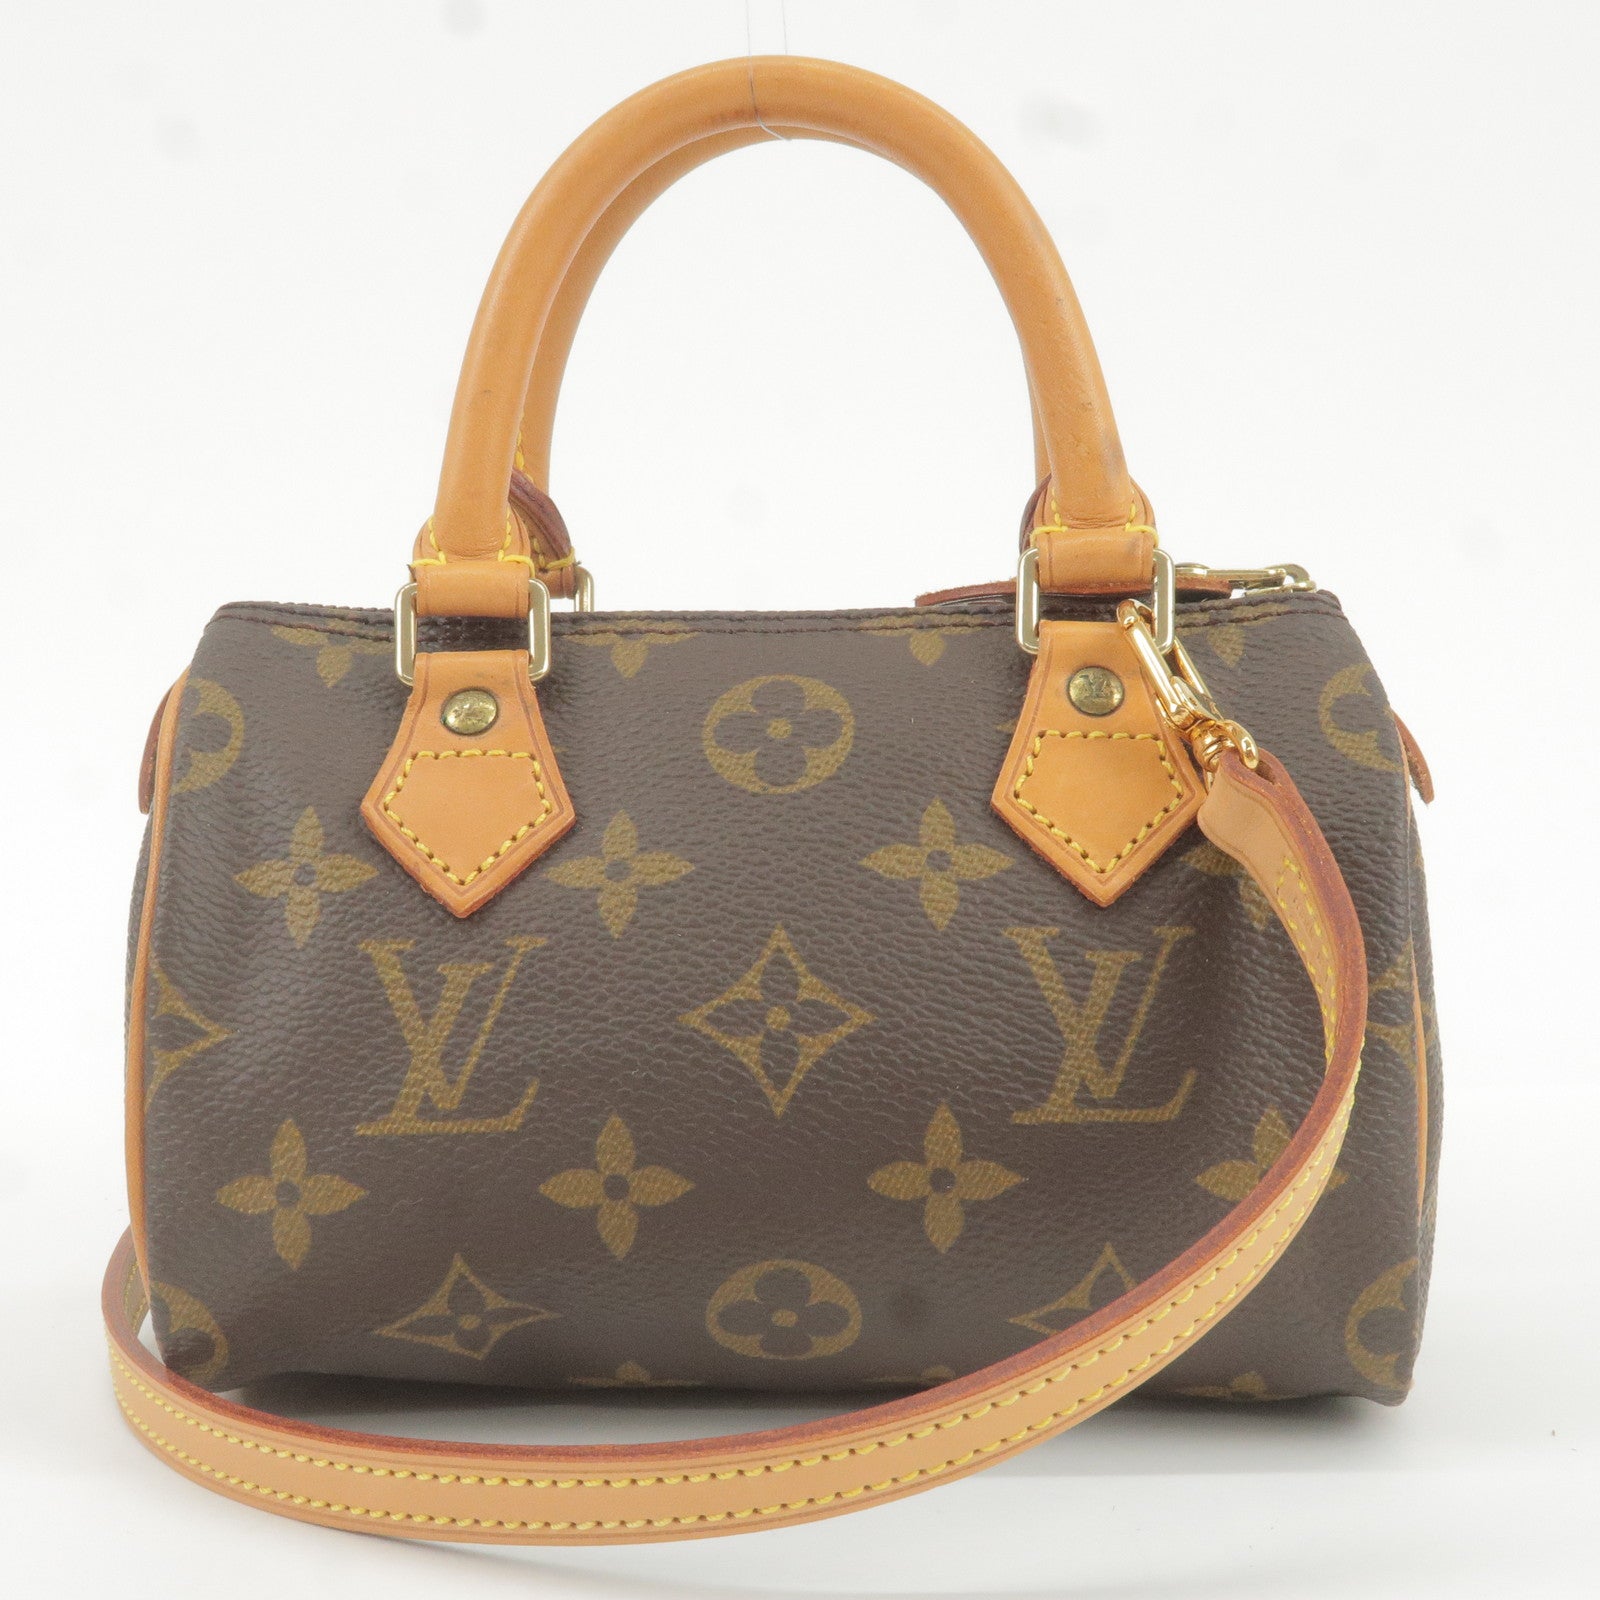 New in Box Louis Vuitton Limited Edition Mini Logo Backpack Bag